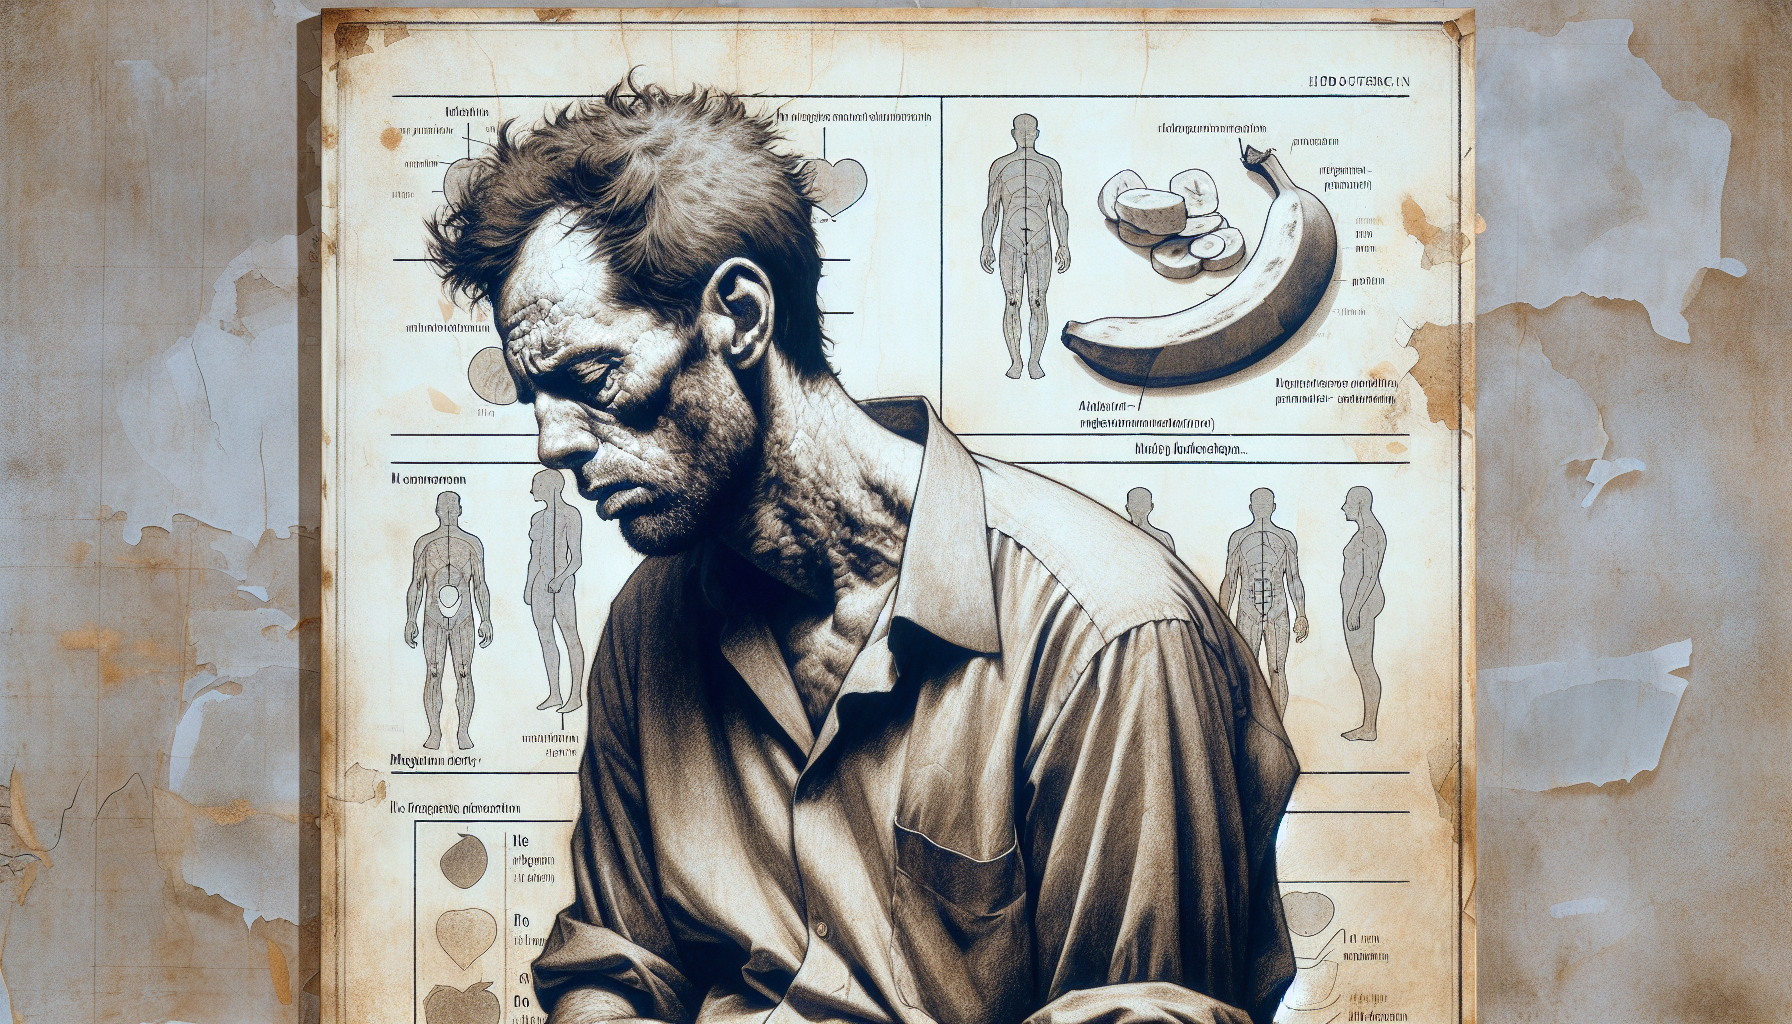 Illustration of a person feeling fatigued and weak